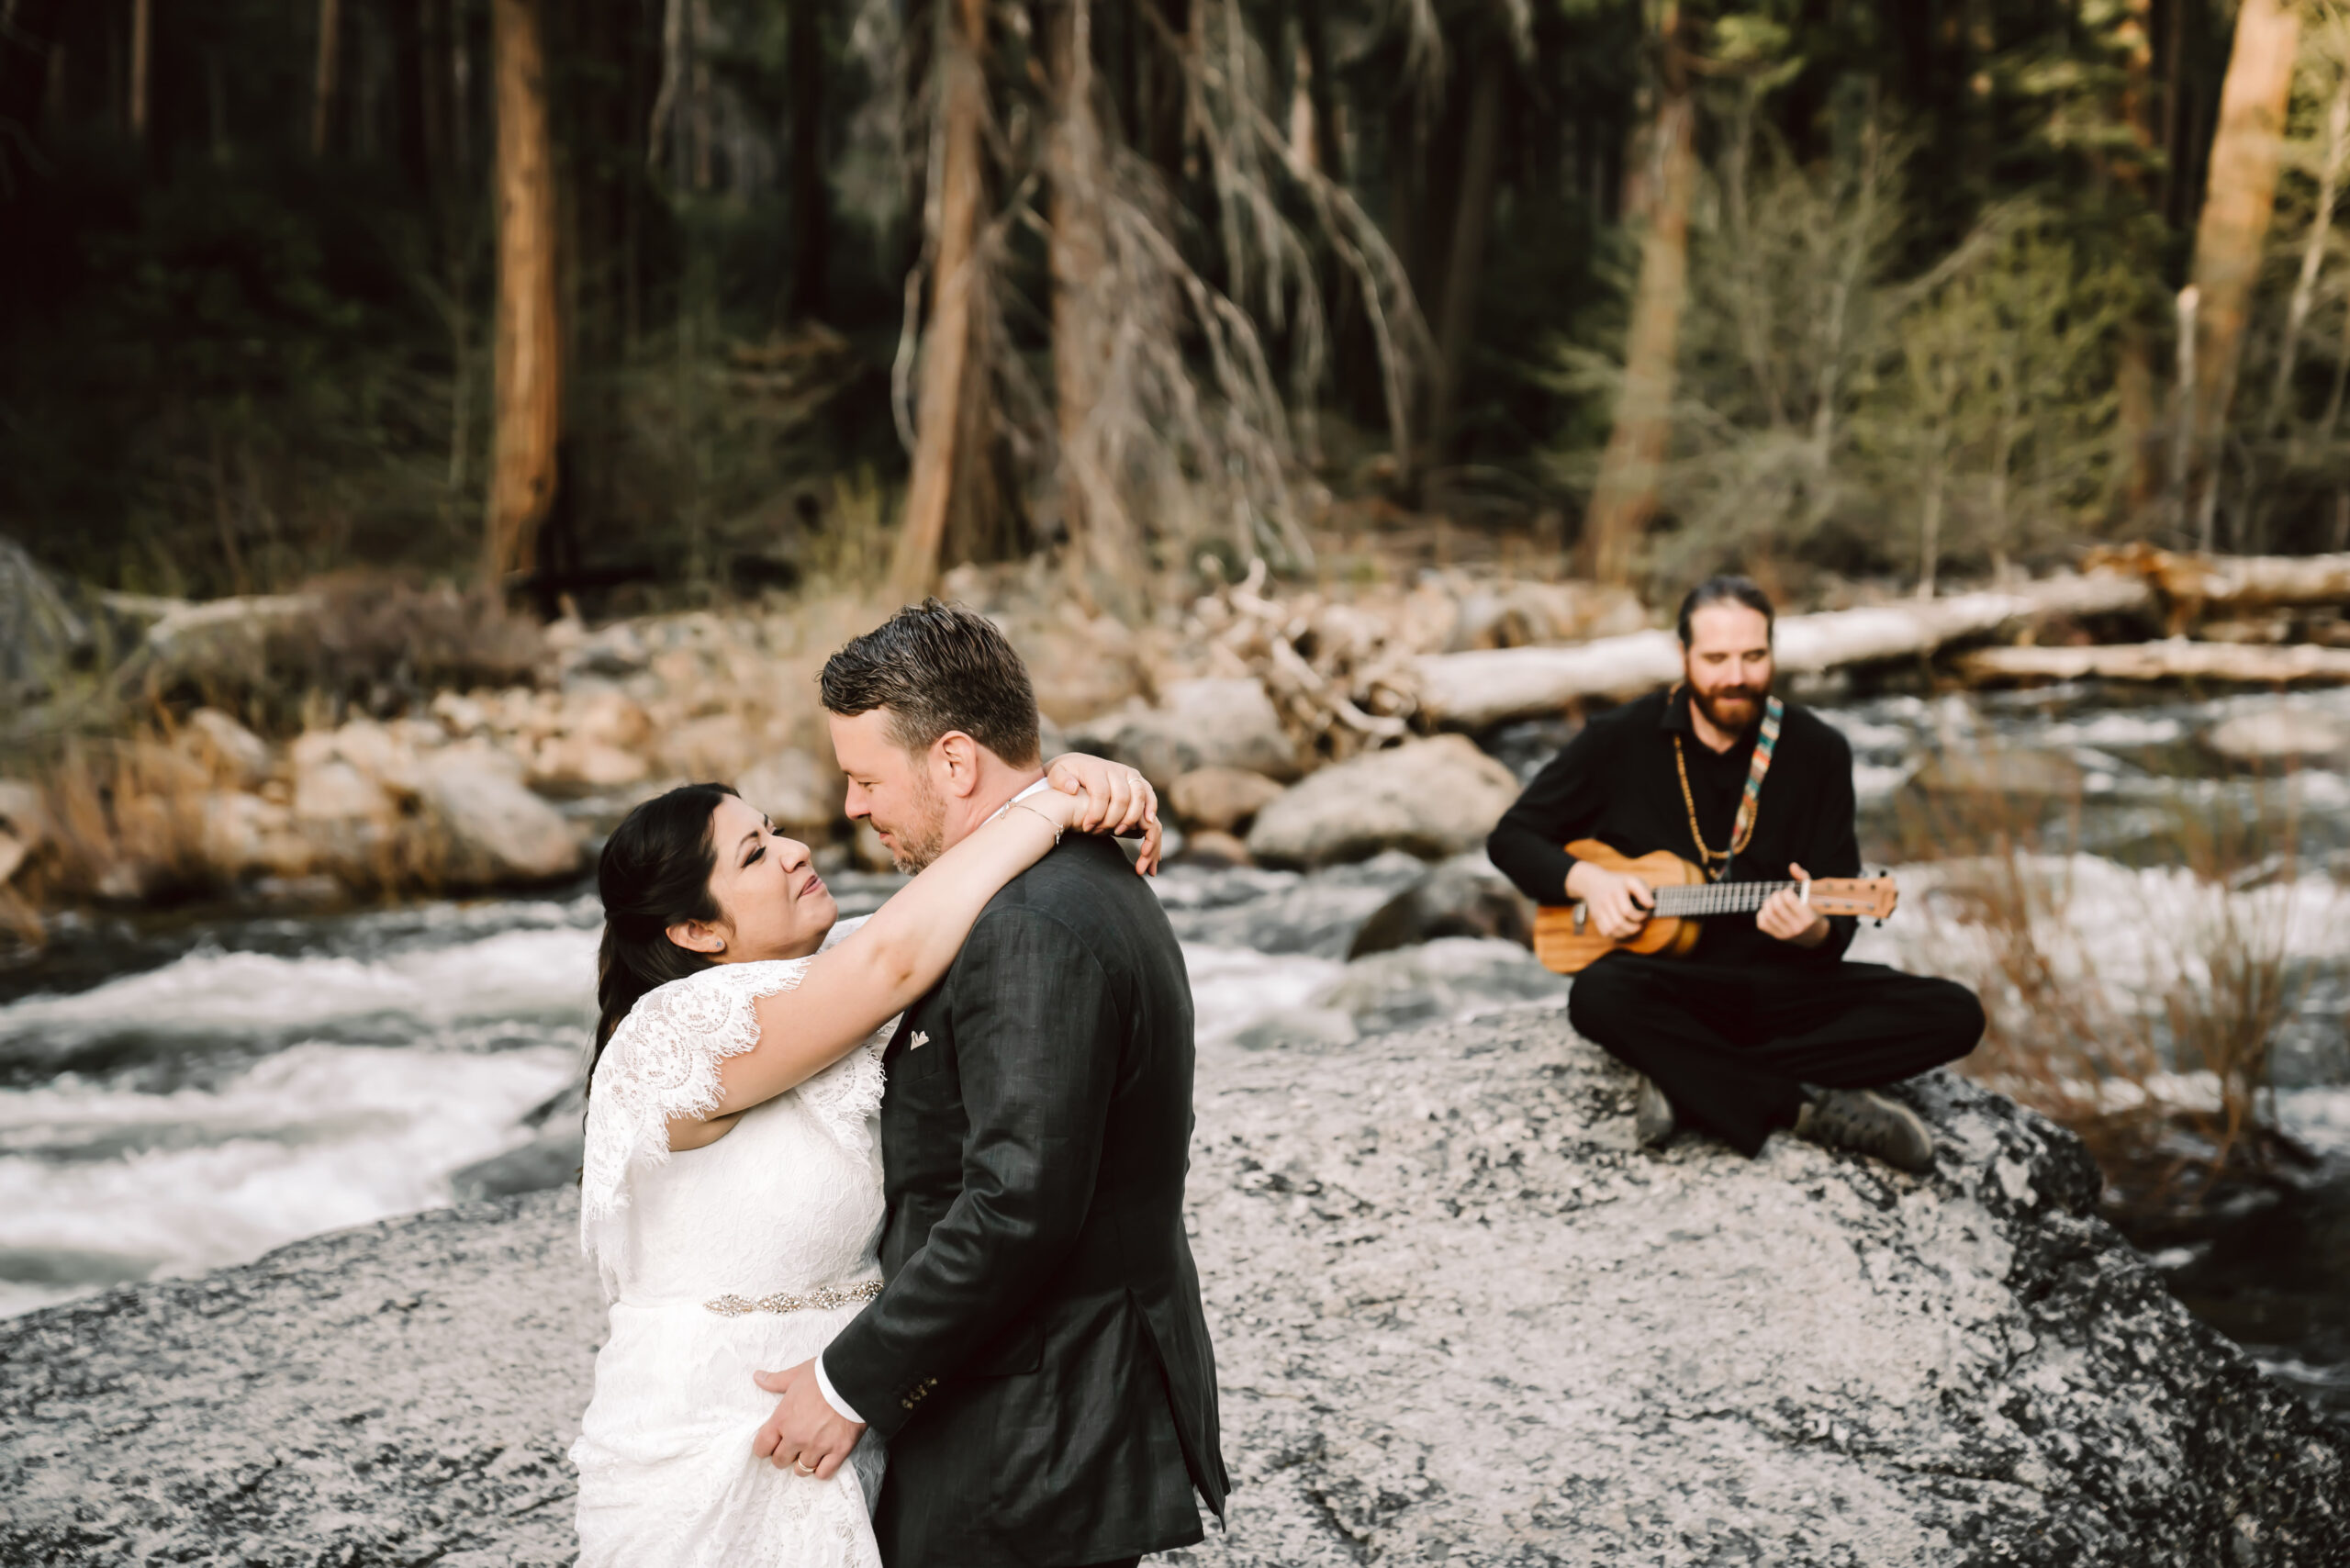 A couple dancing next to the river for their first dance on their elopement day